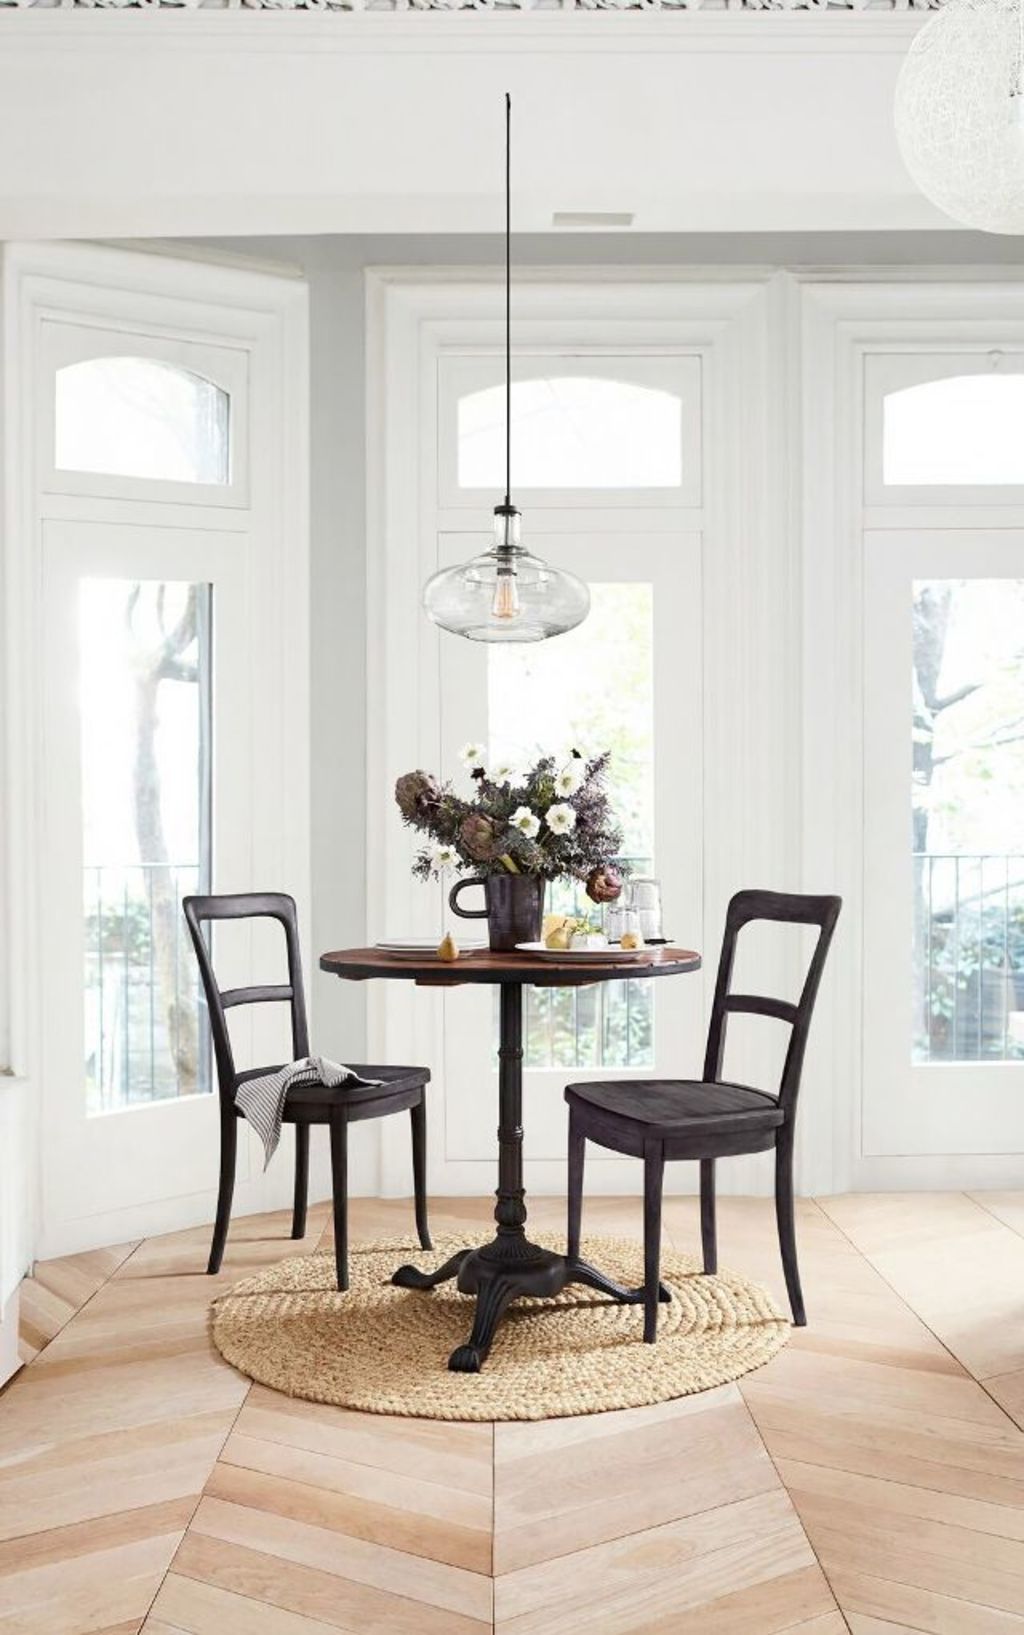 Invest in furniture with more than one function. Photo: Pottery Barn Photo: undefined